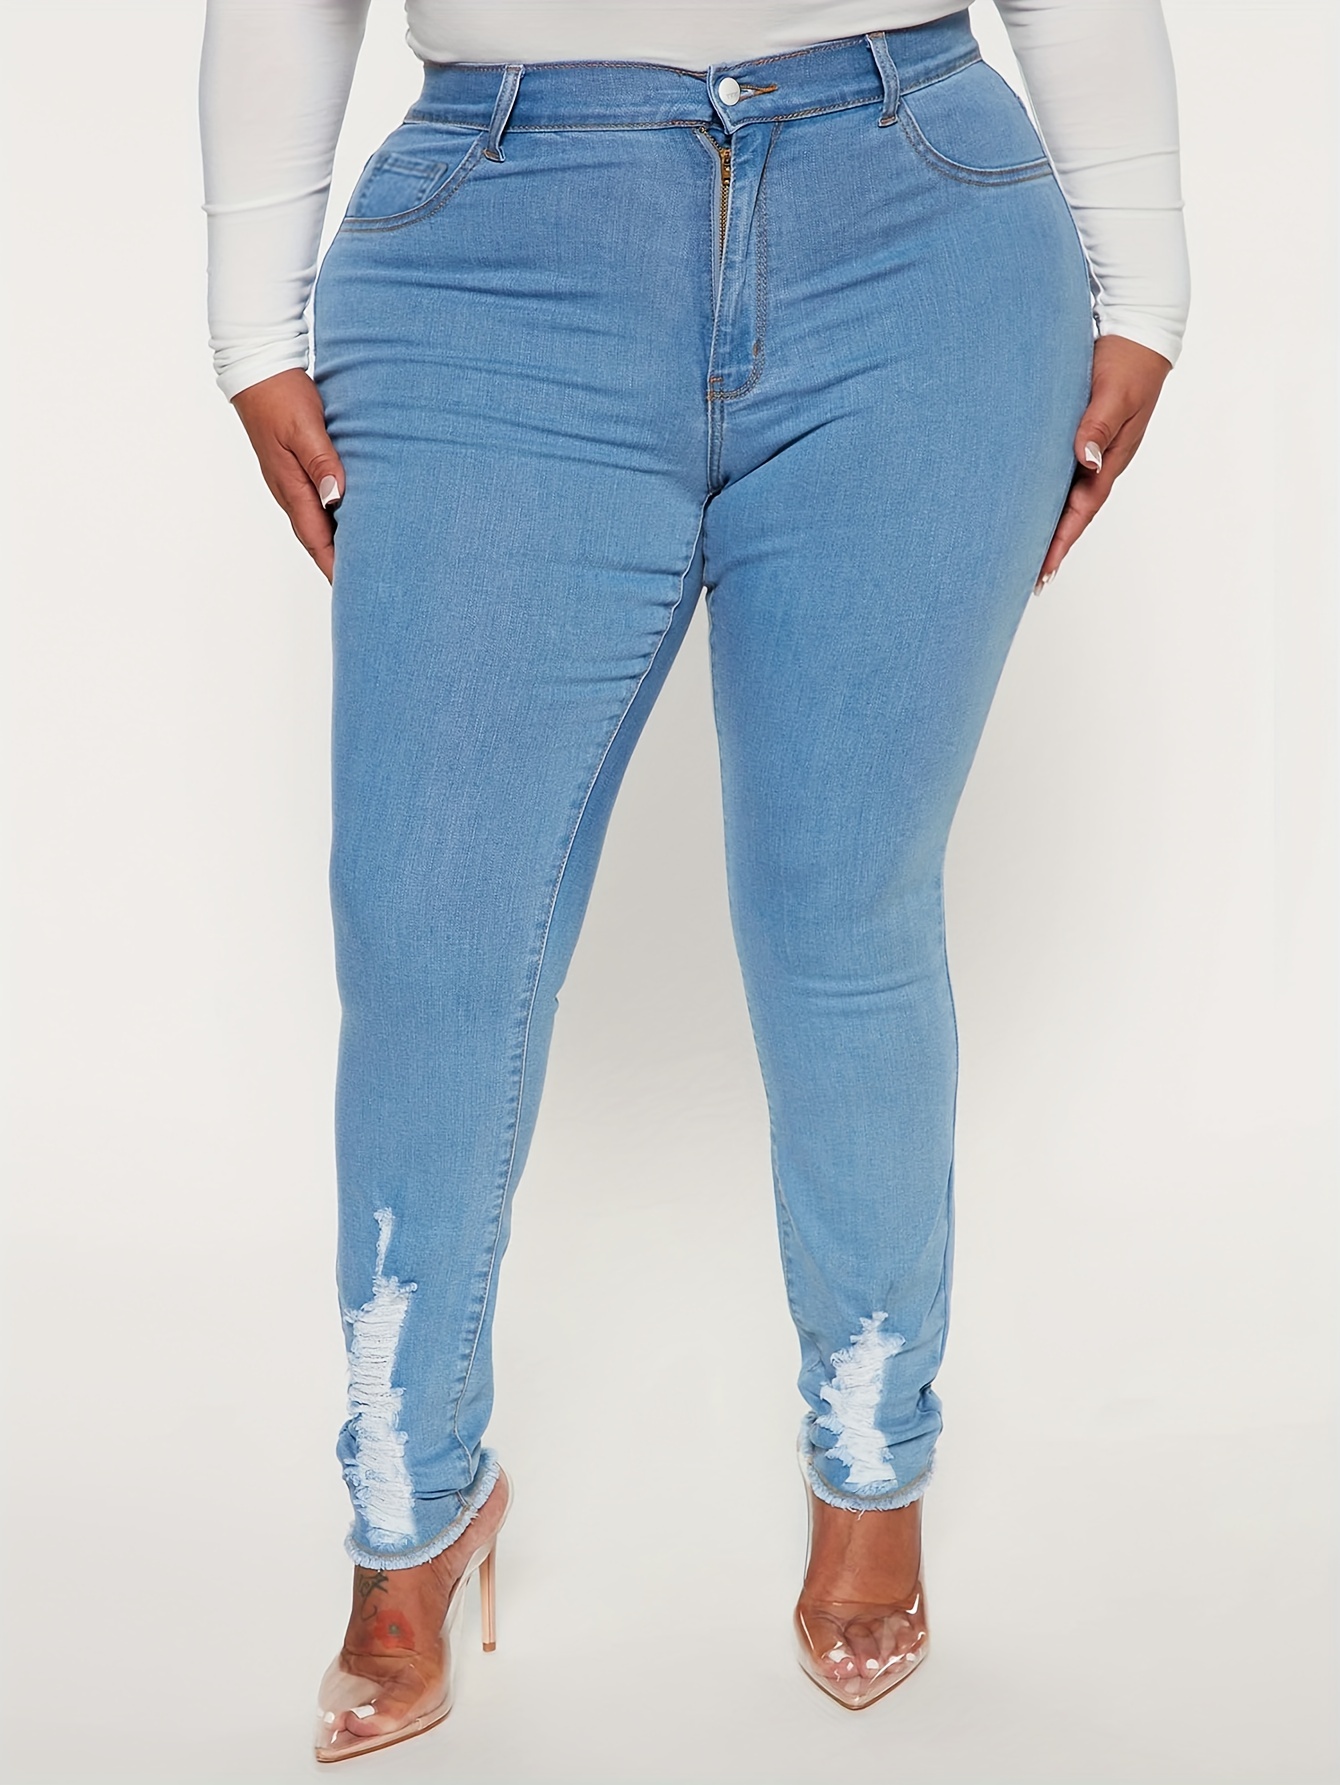 Plus Size Casual Jeans, Women's Plus Solid Ripped Raw Trim Button Fly High  Rise High Stretch Skinny Jeans